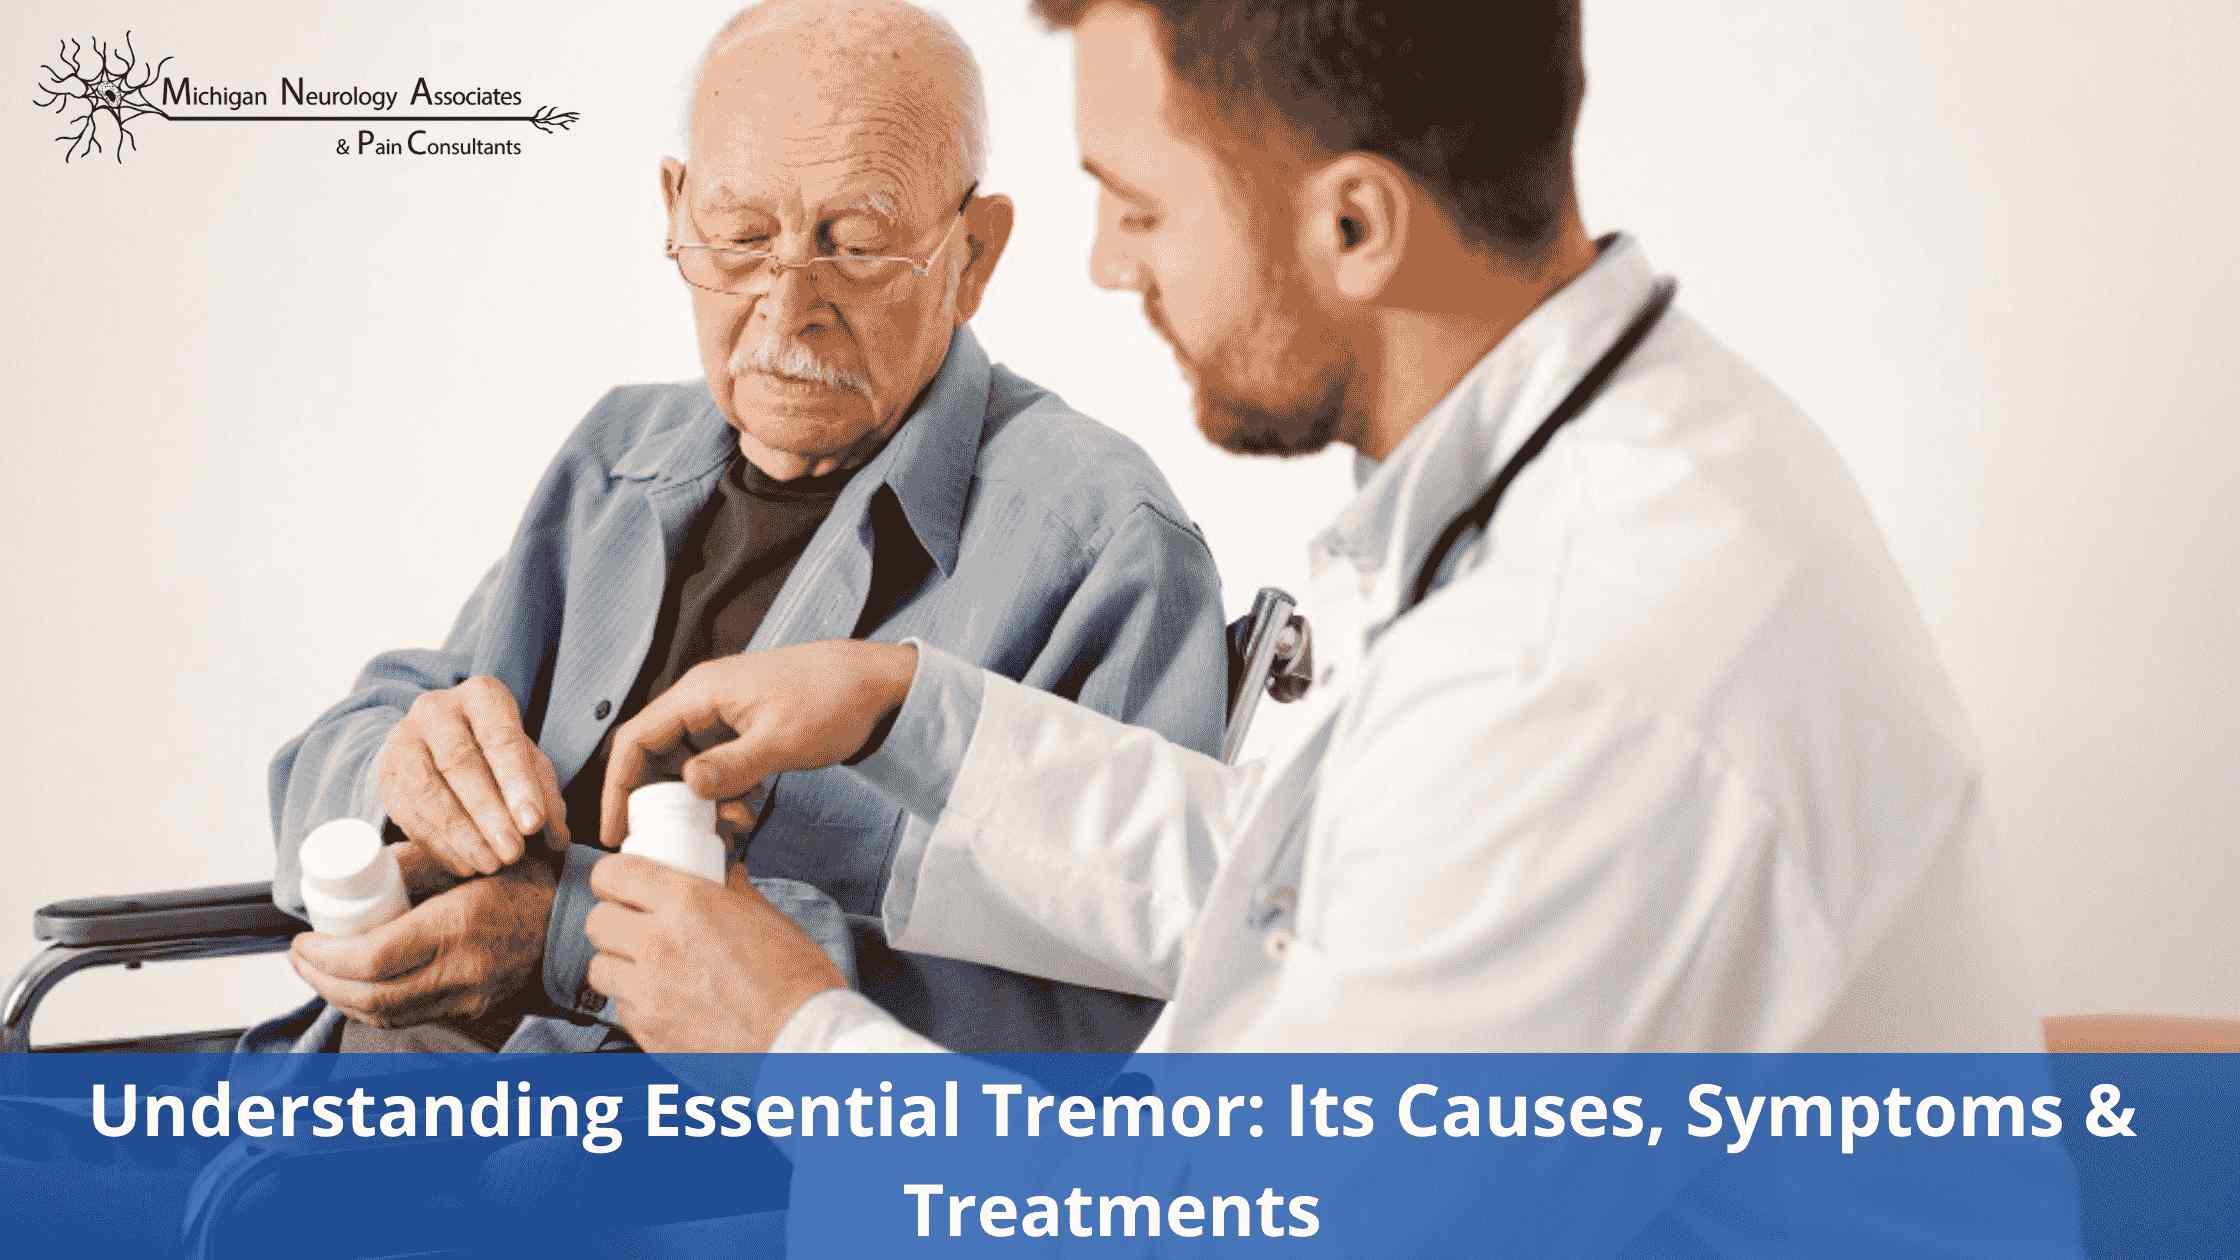 Understanding Essential Tremor: Its Causes, Symptoms & Treatments